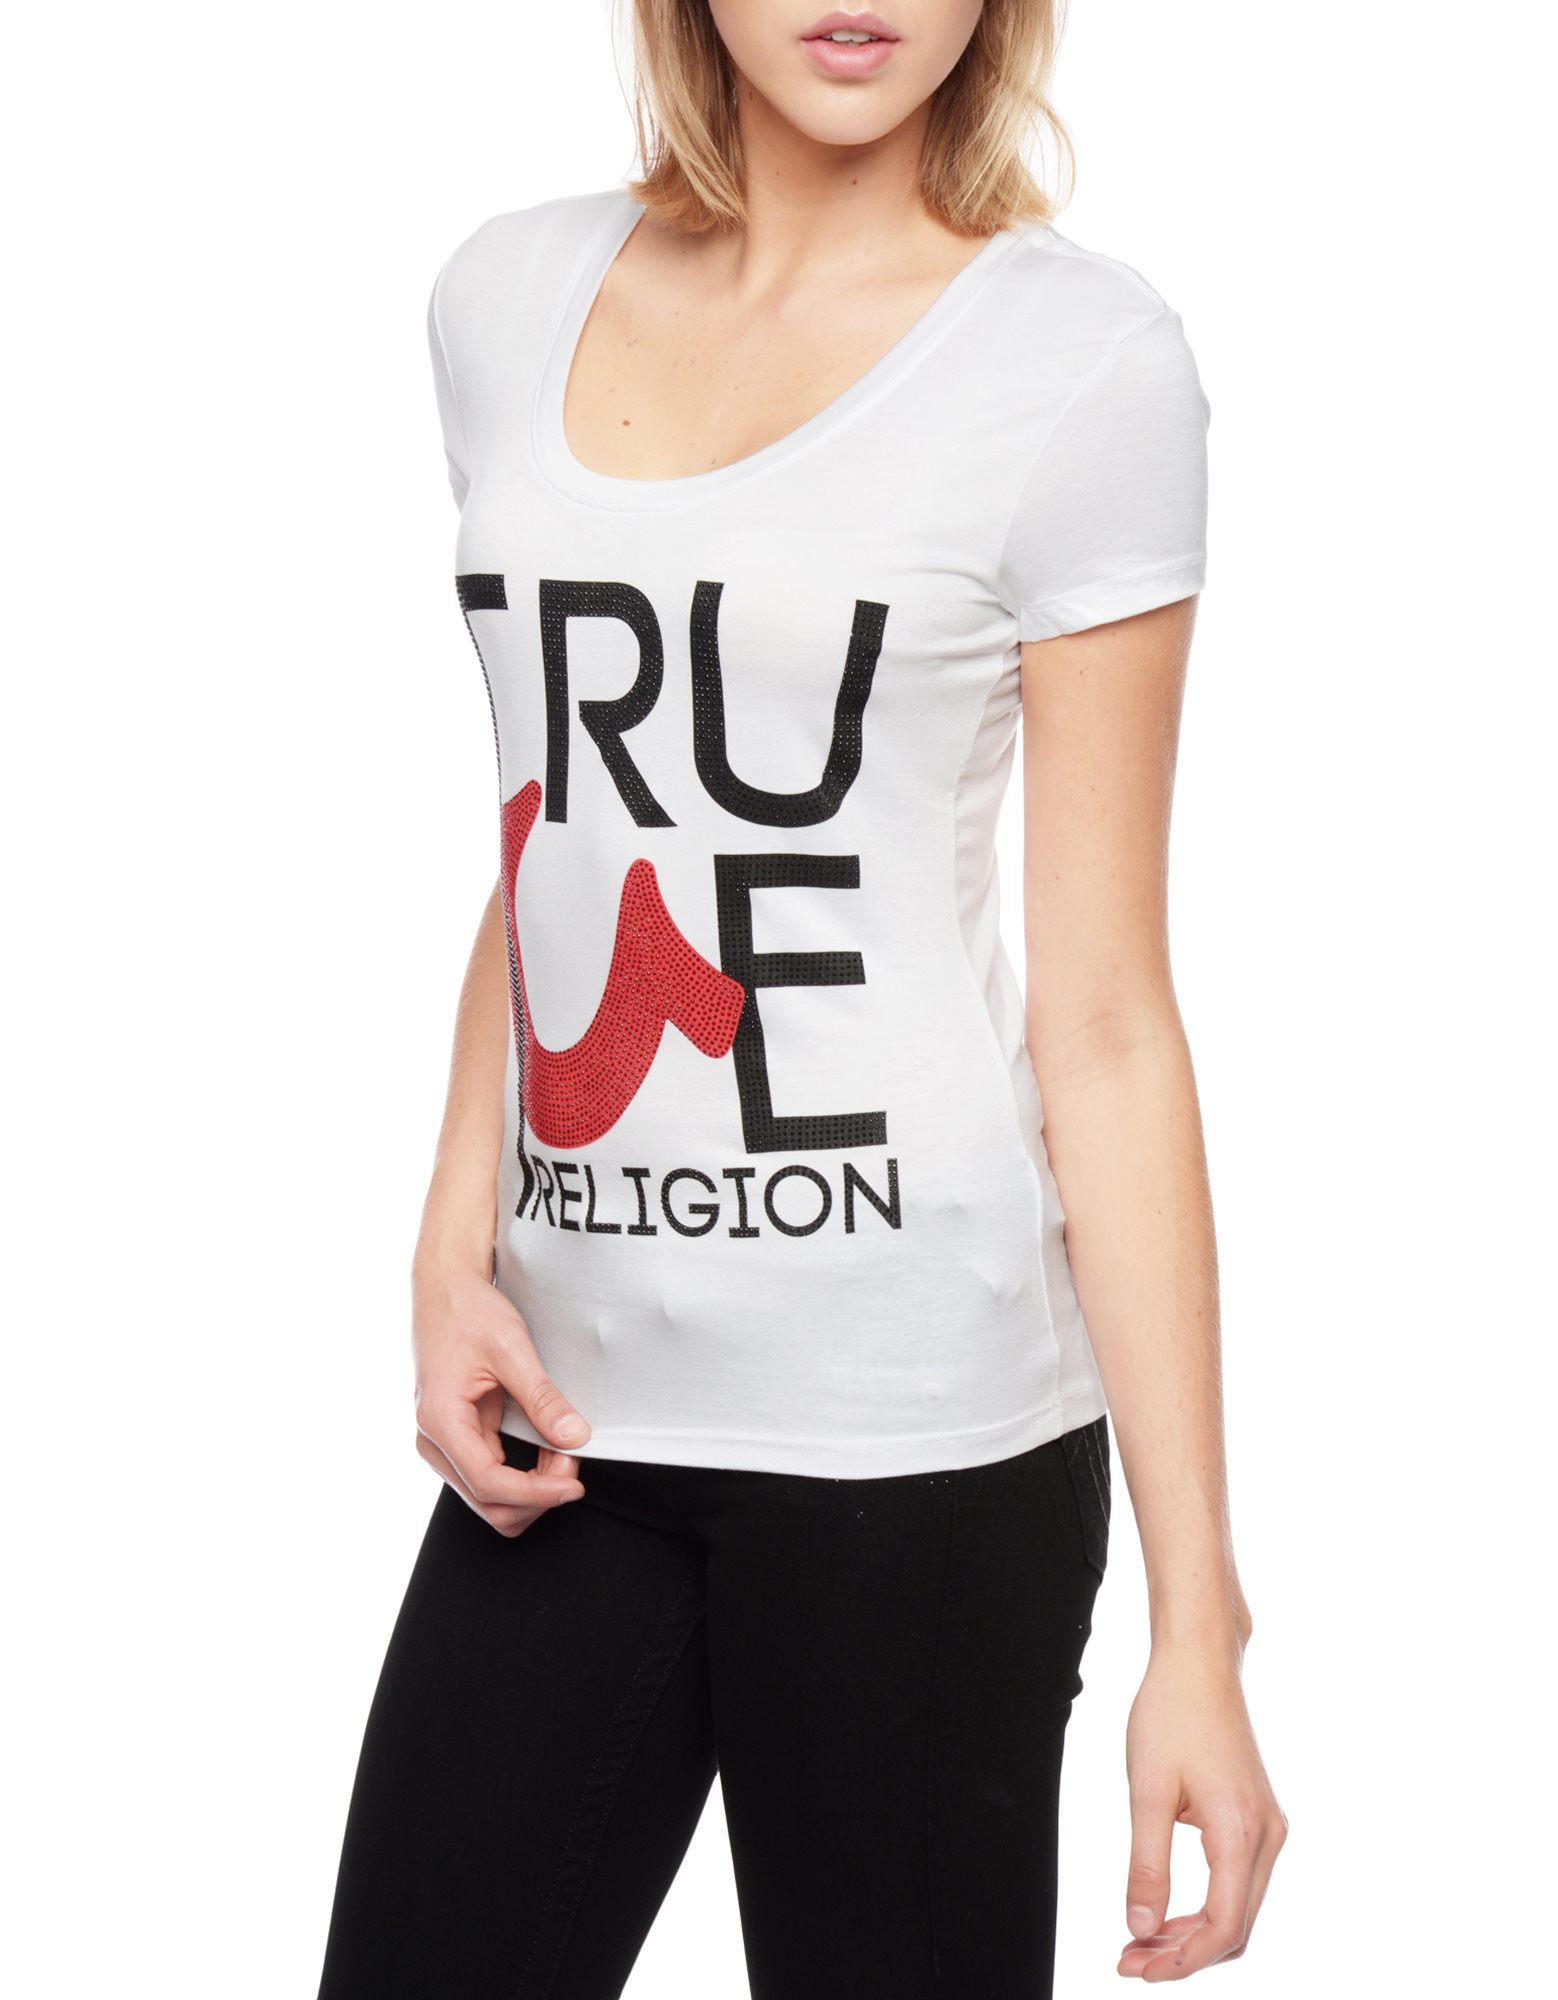 True religion Hand Picked Crystal Scoopneck Womens T-Shirt in White | Lyst